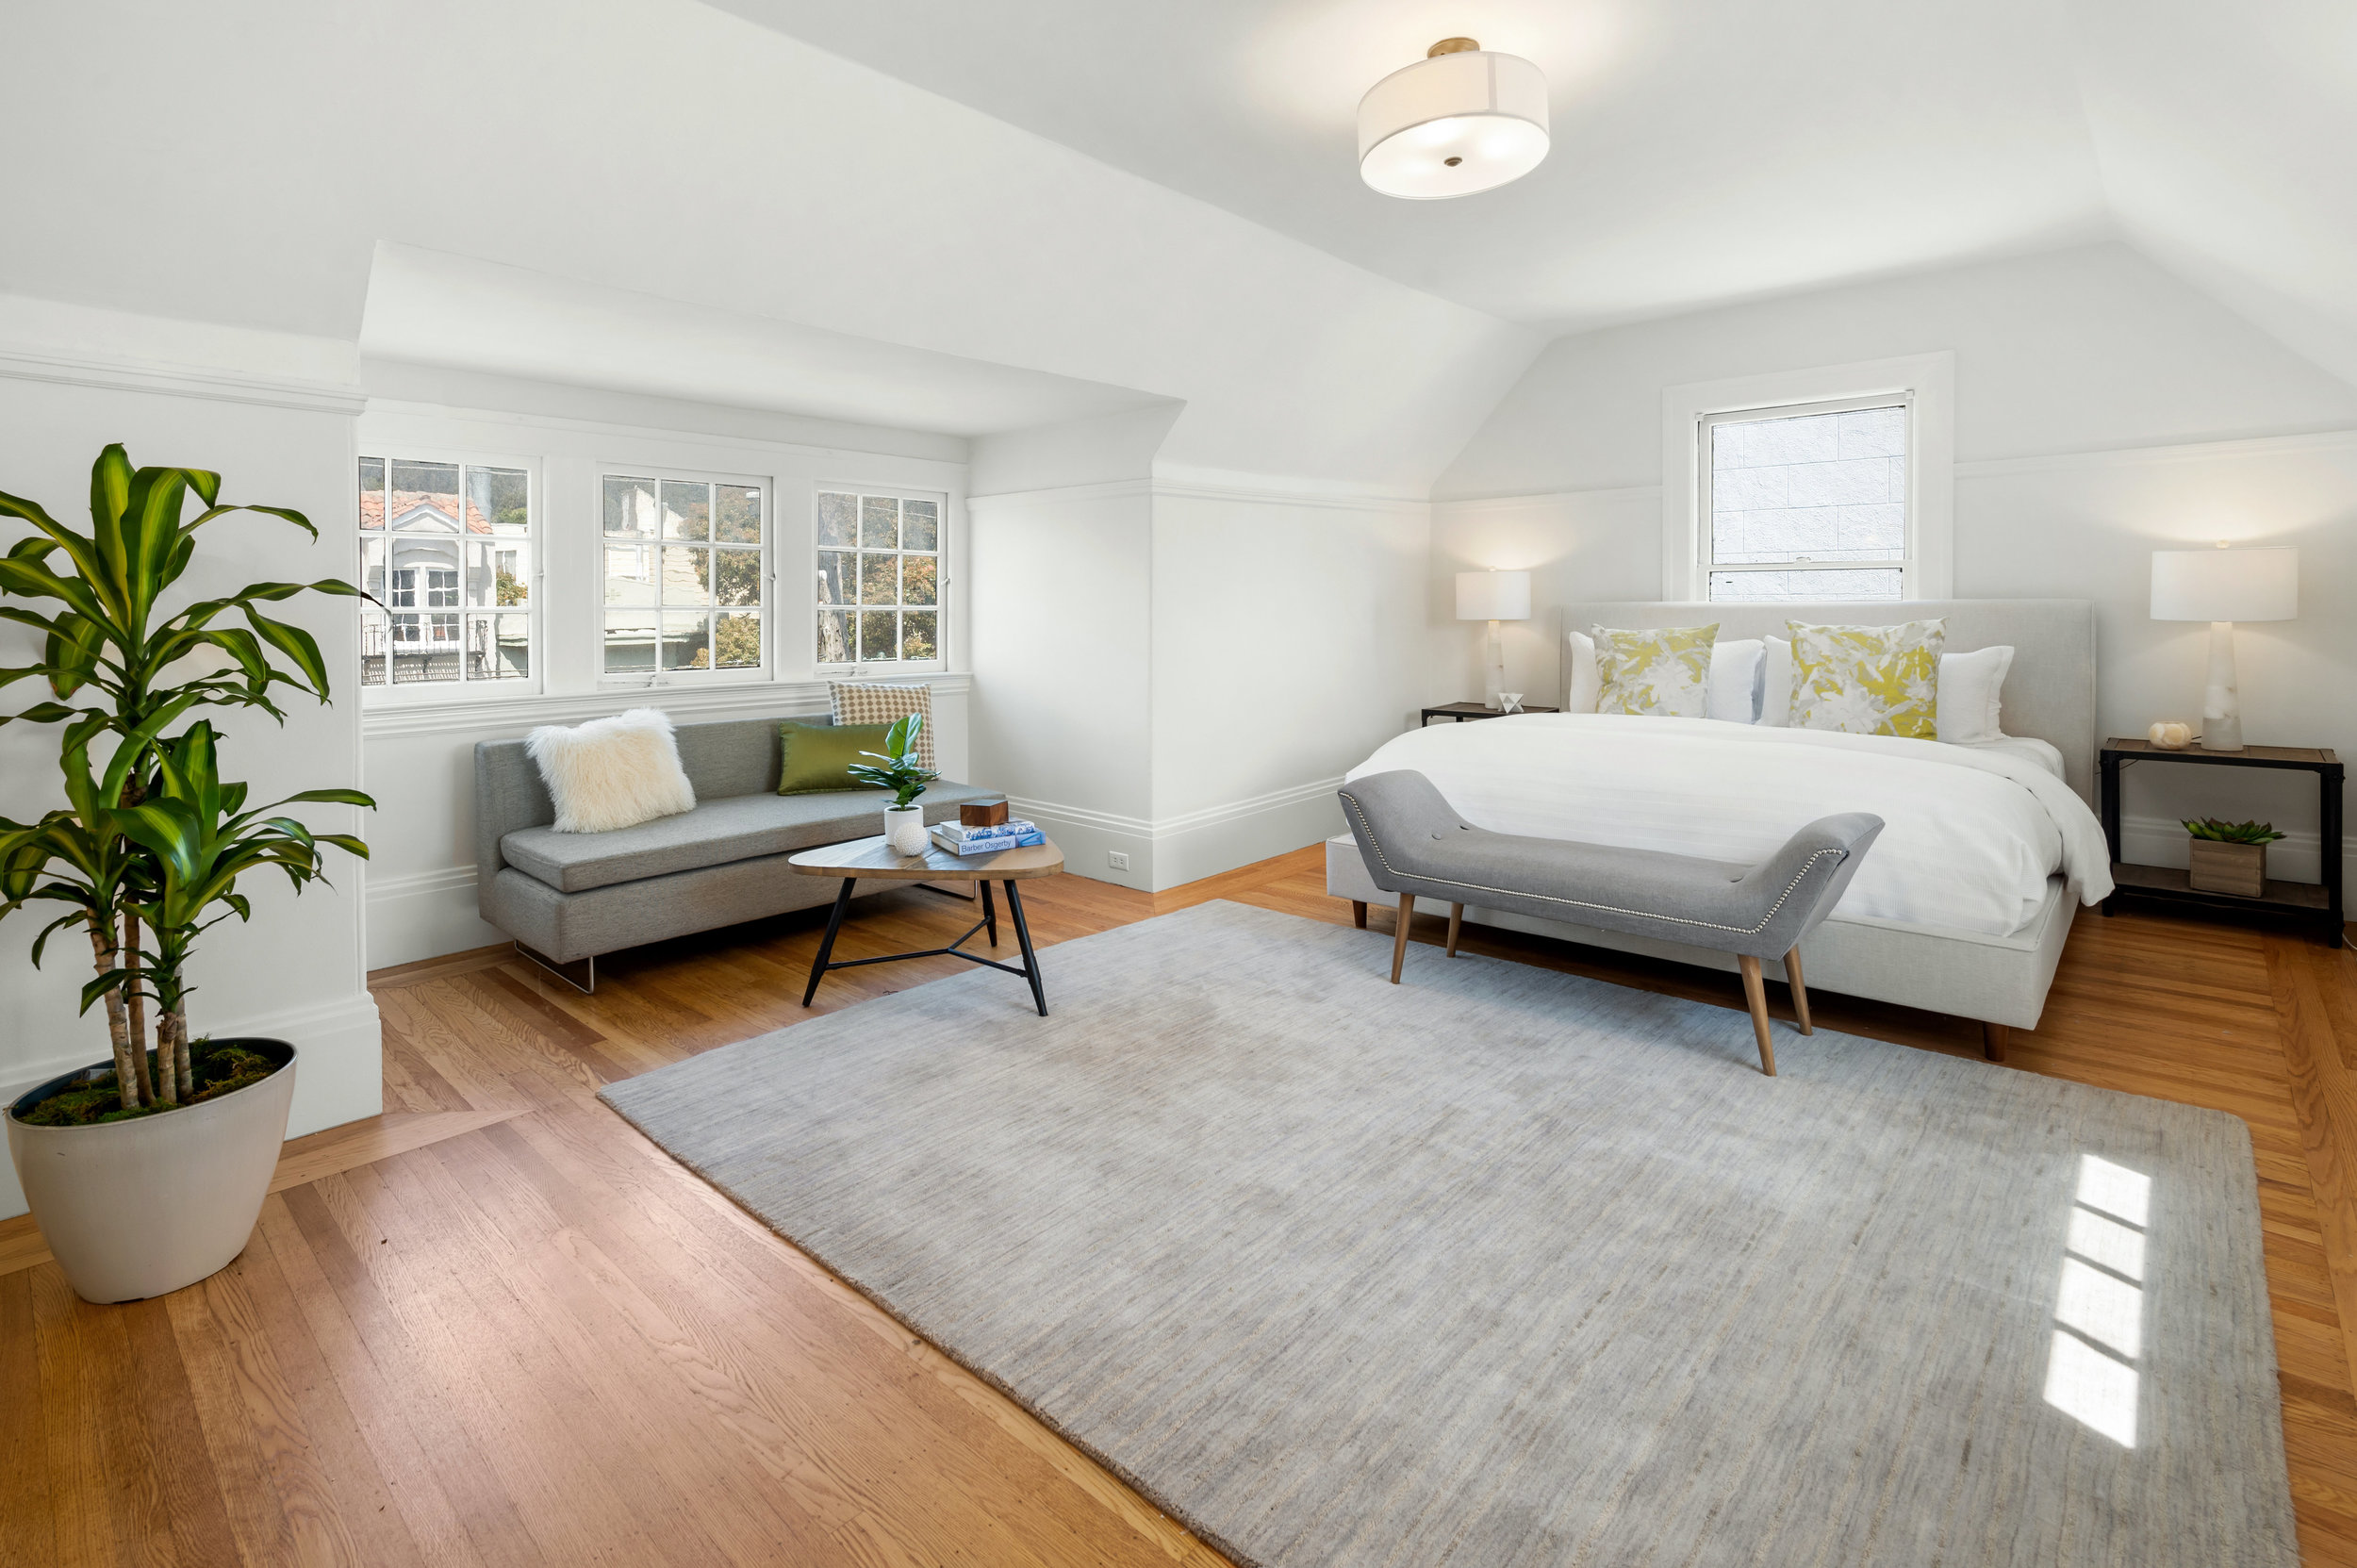 Property Photo: A luxury primary bedroom with wood floors and plenty of natural light